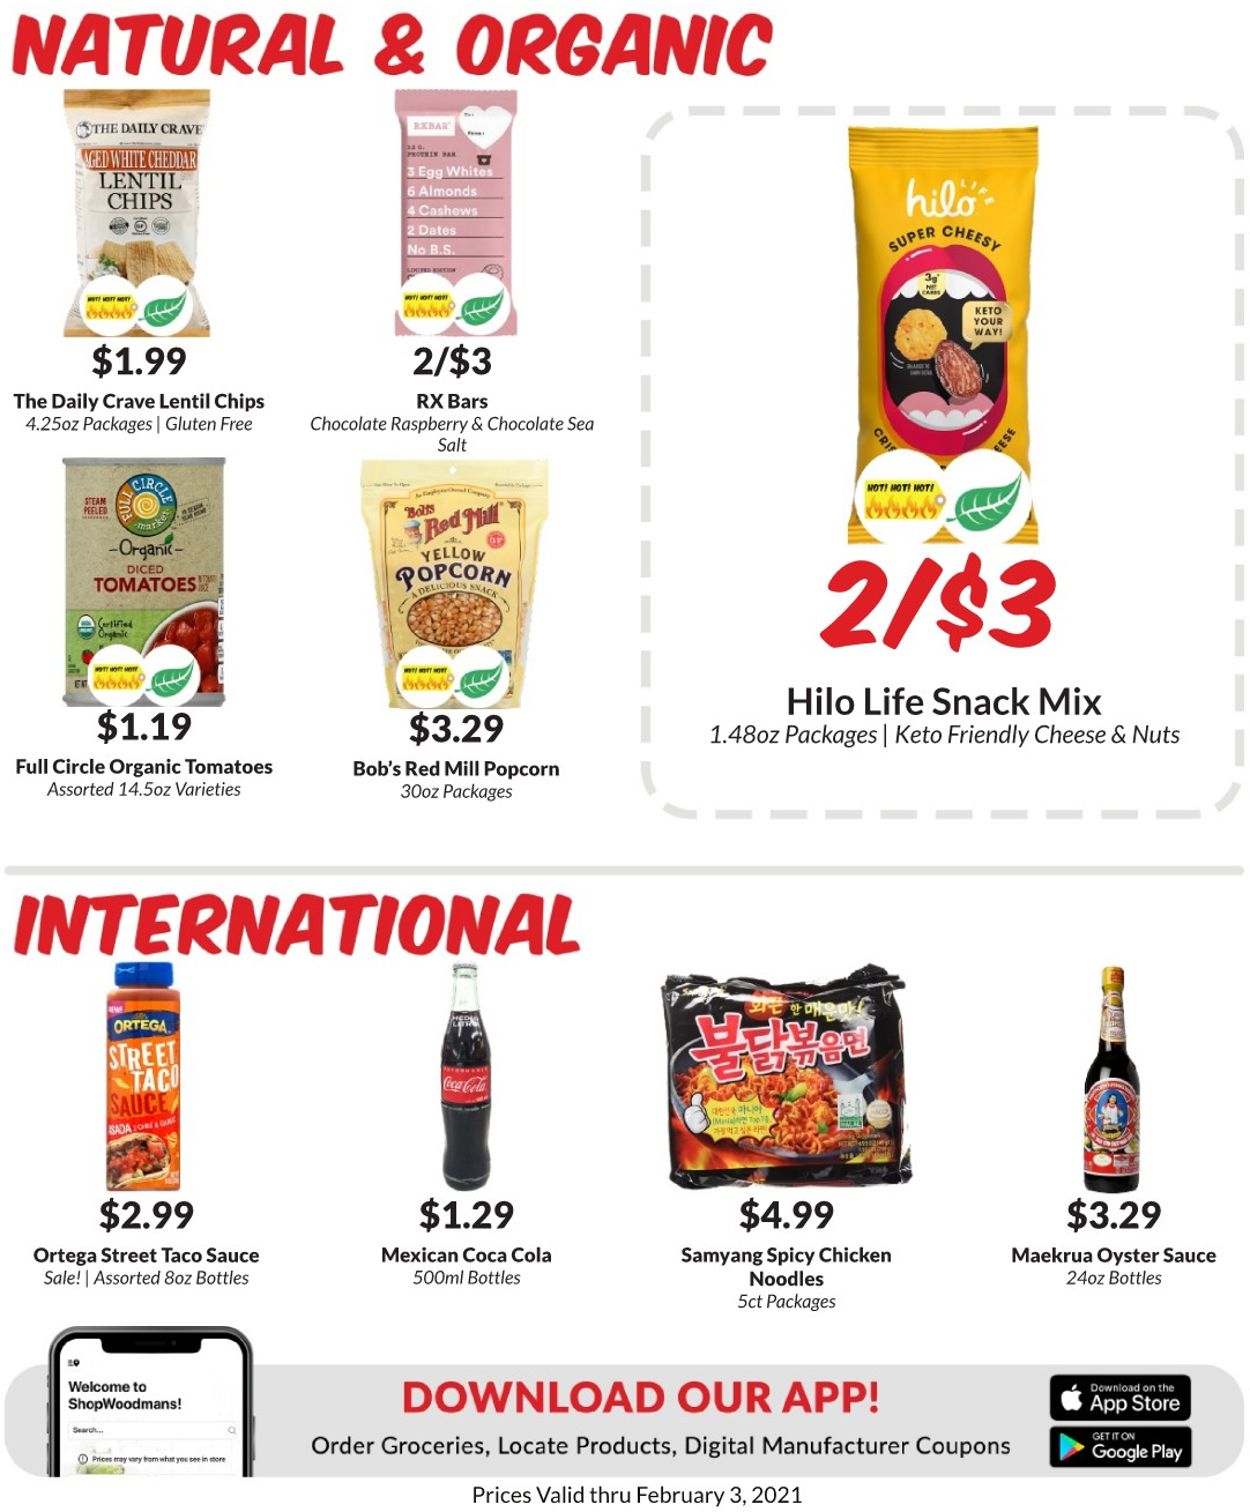 Woodman's Market Ad from 01/28/2021